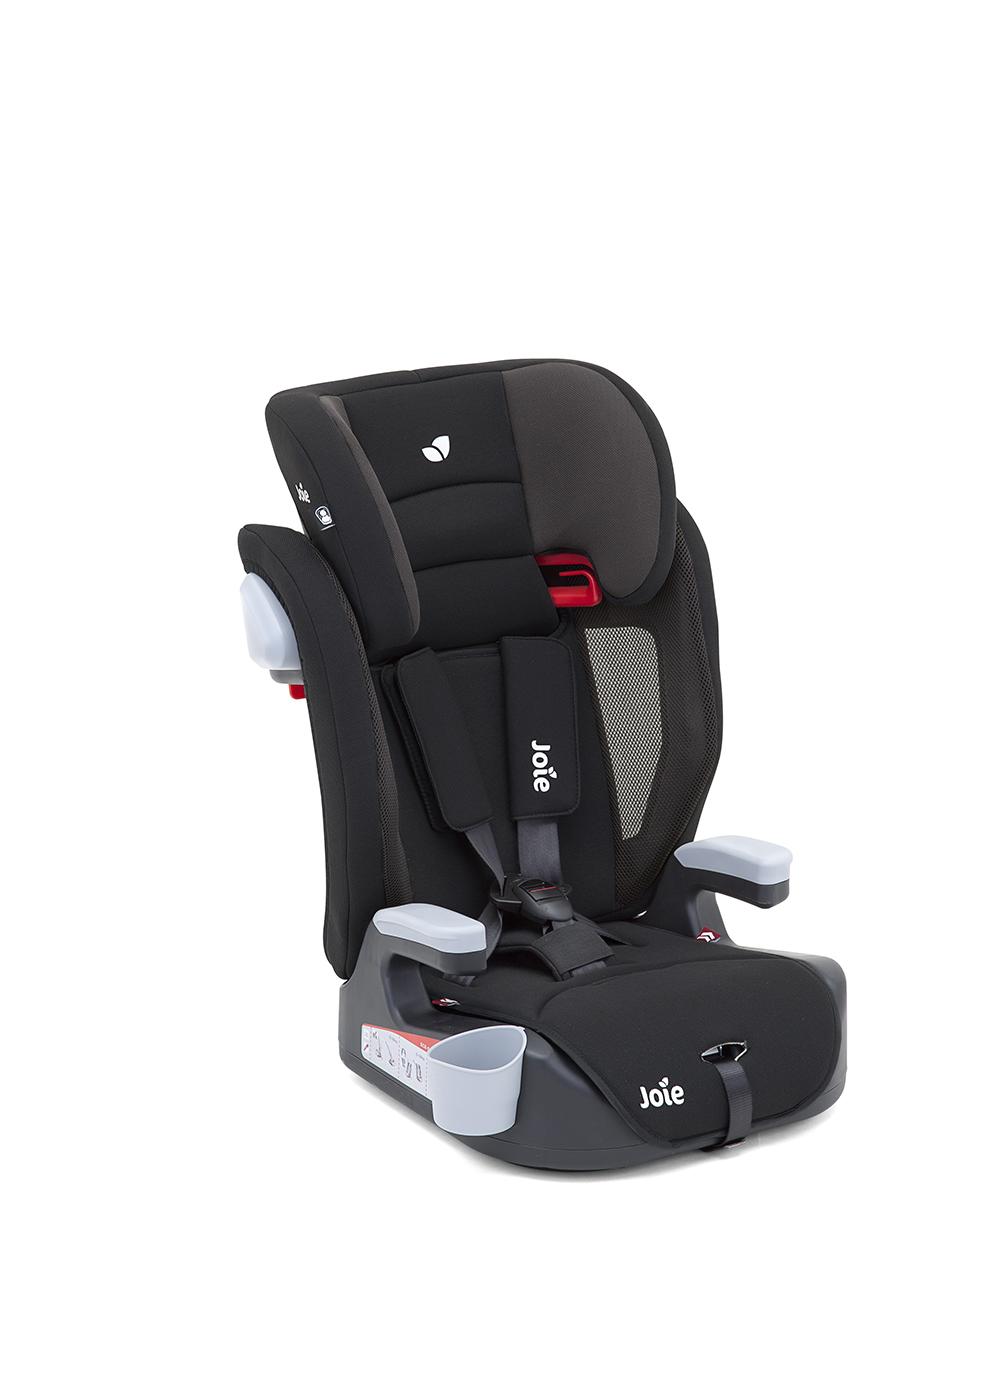 Joie Elevate Car Seat Img 1